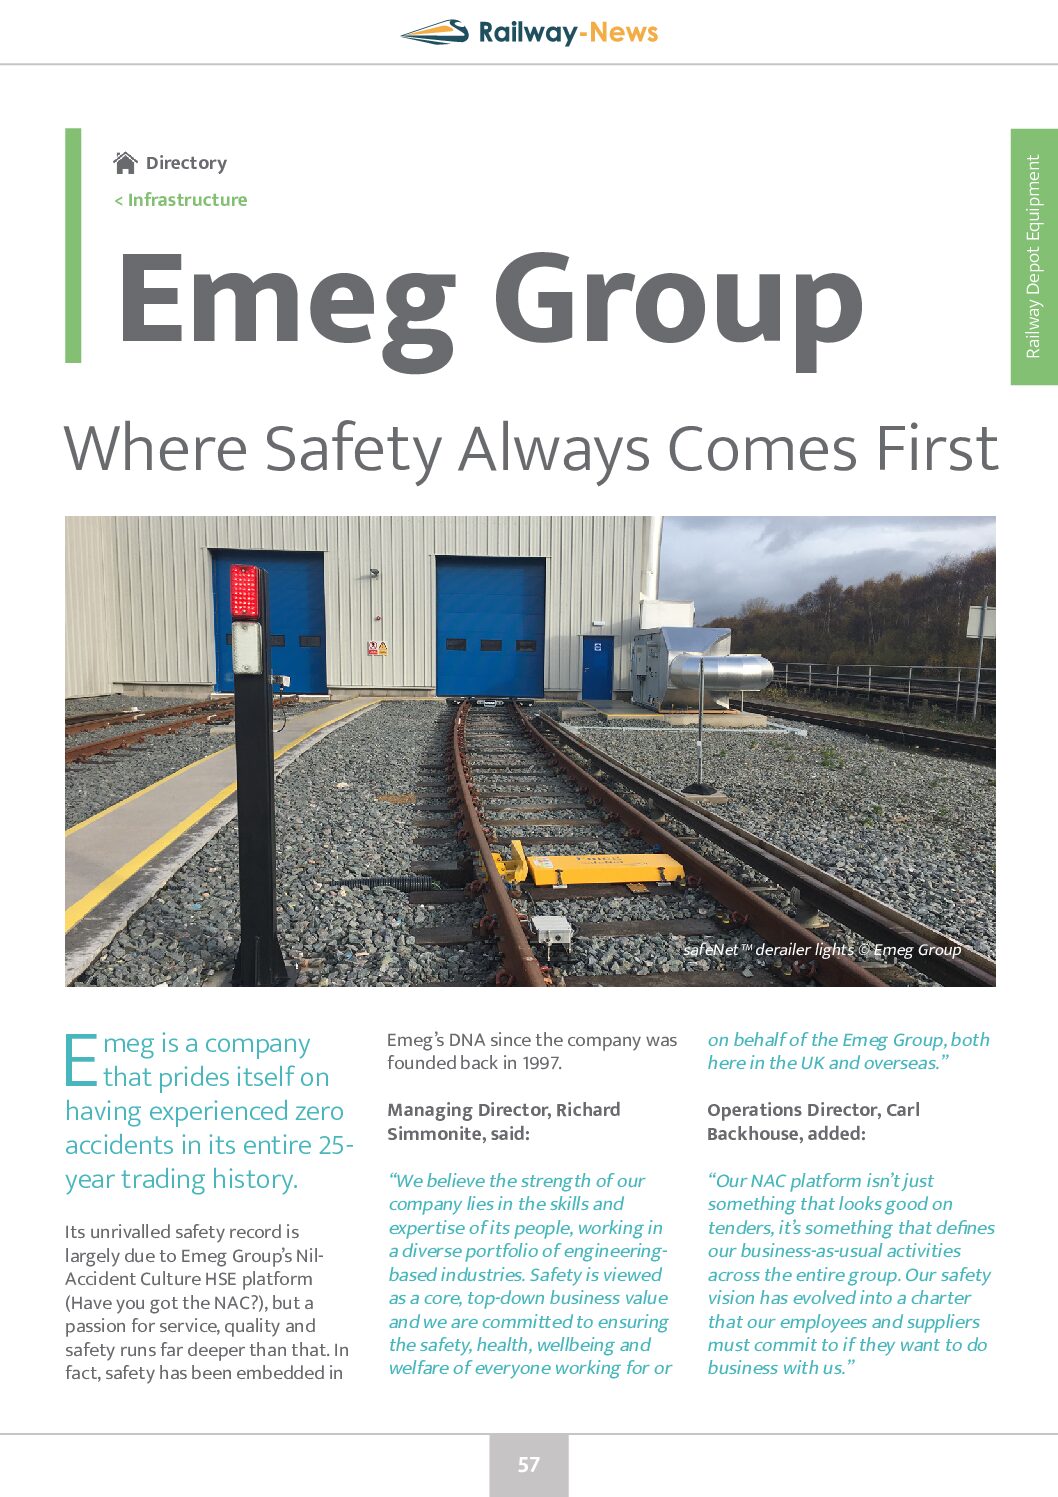 Emeg® Group: Where Safety Always Comes First